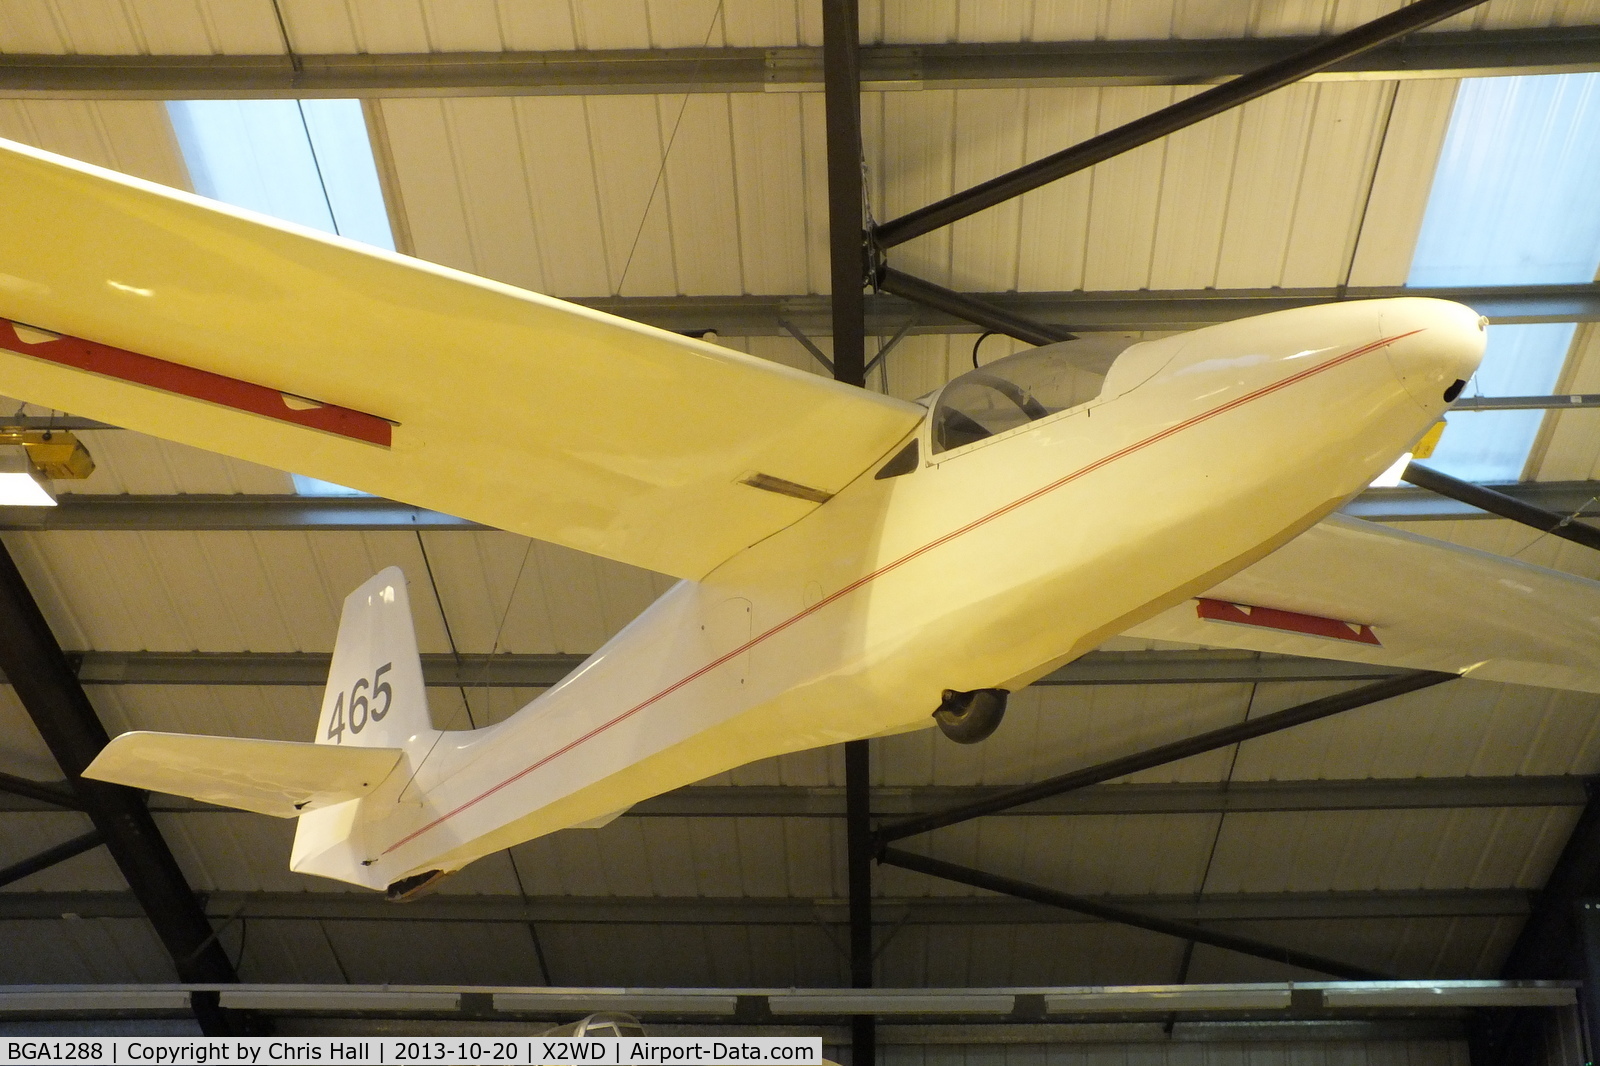 BGA1288, 1965 Elliots Of Newbury 460-1 Olympia C/N Not found BGA1288, one of only two produced, Built in 1965 for the World Gliding Championships, preserved at the Museum of Berkshire Aviation, Woodley